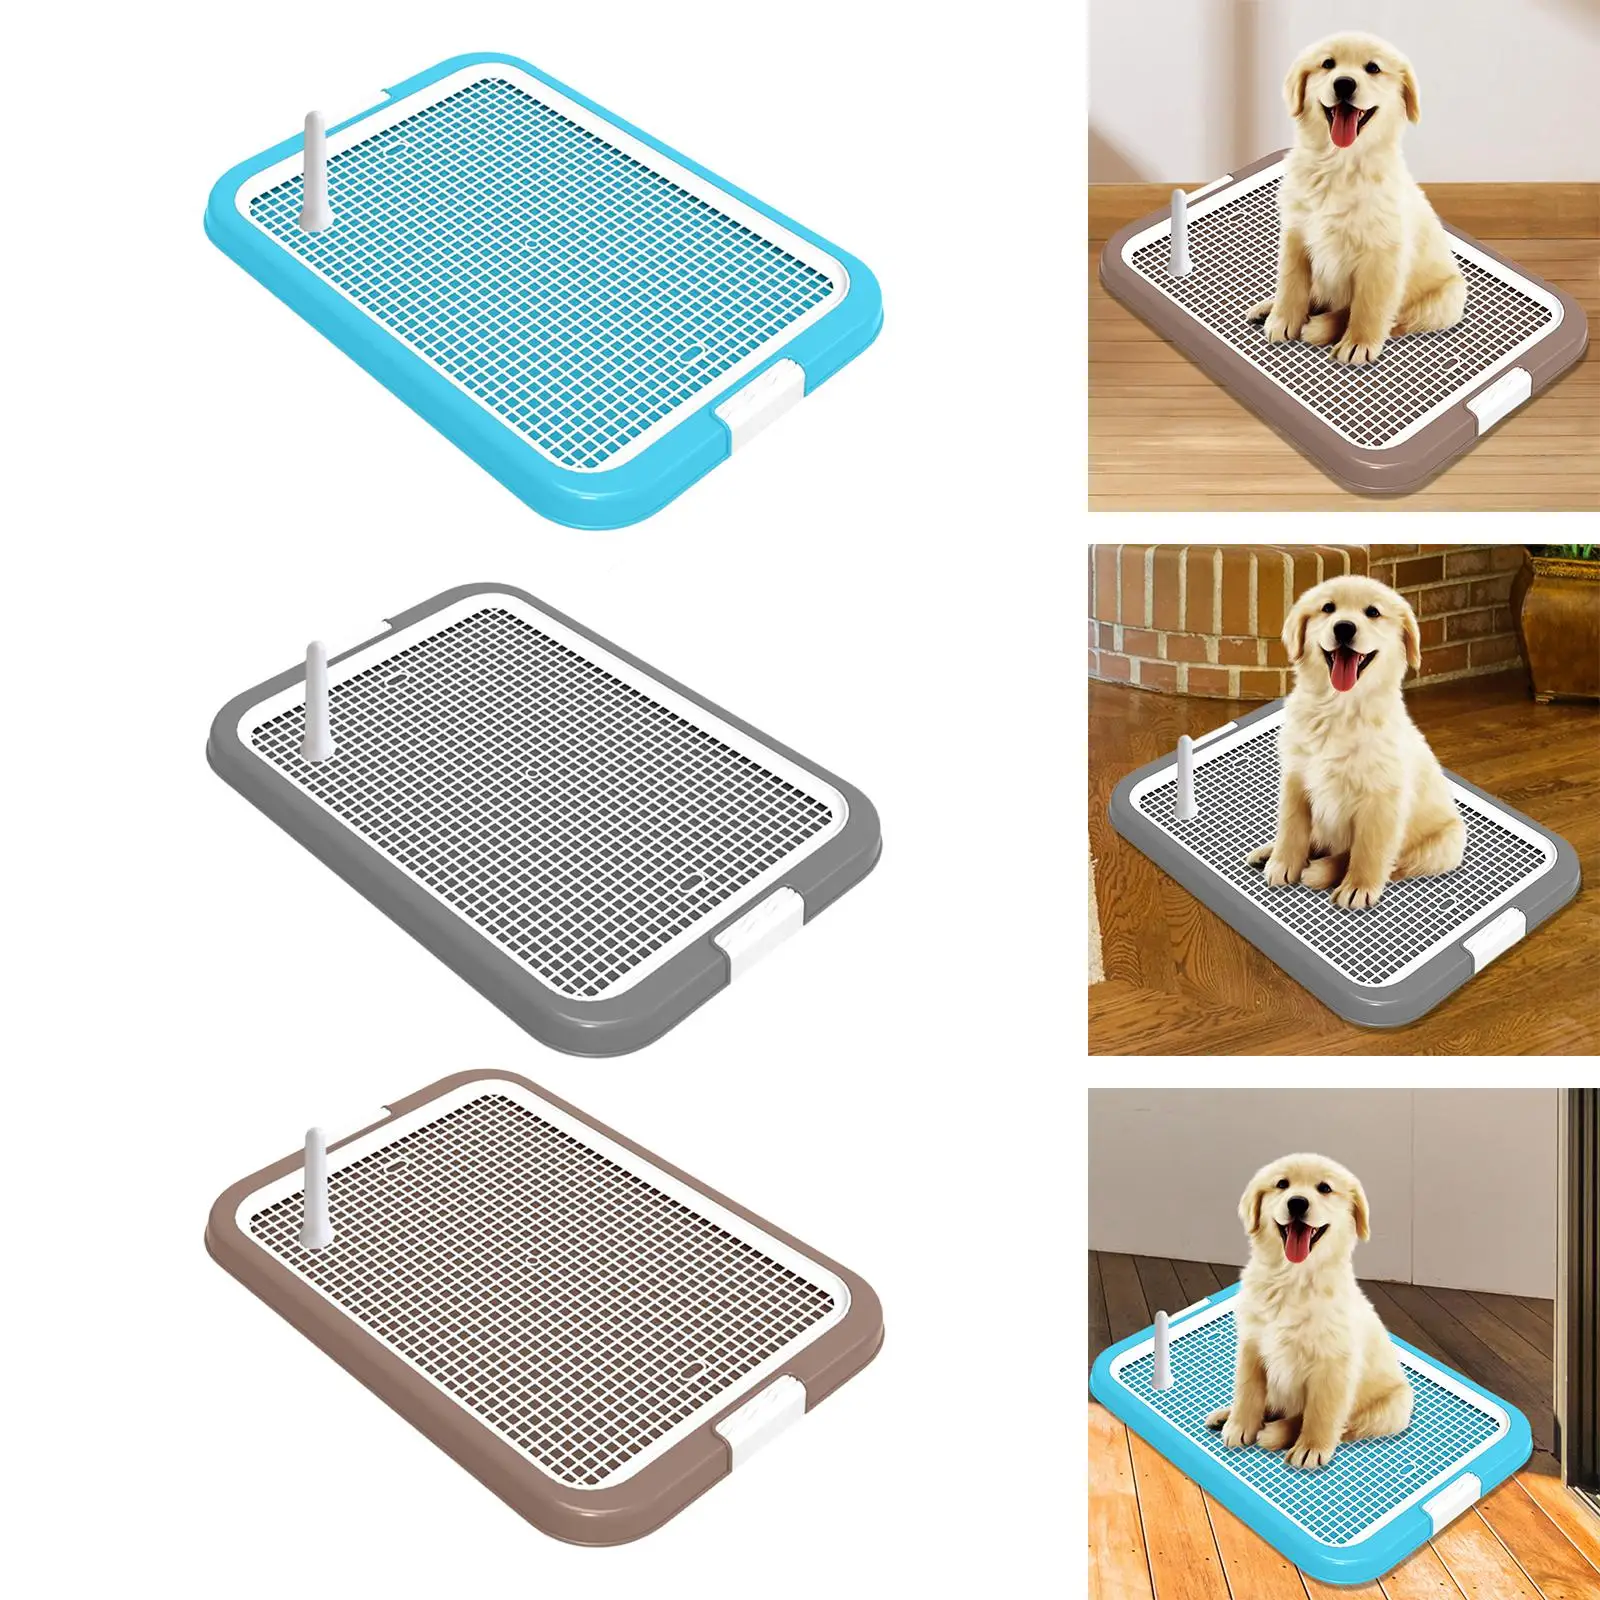 Dog Toilet Training Potty Tray Pans Training Pads Holder Pet Litter Box for Kitty Small Animals